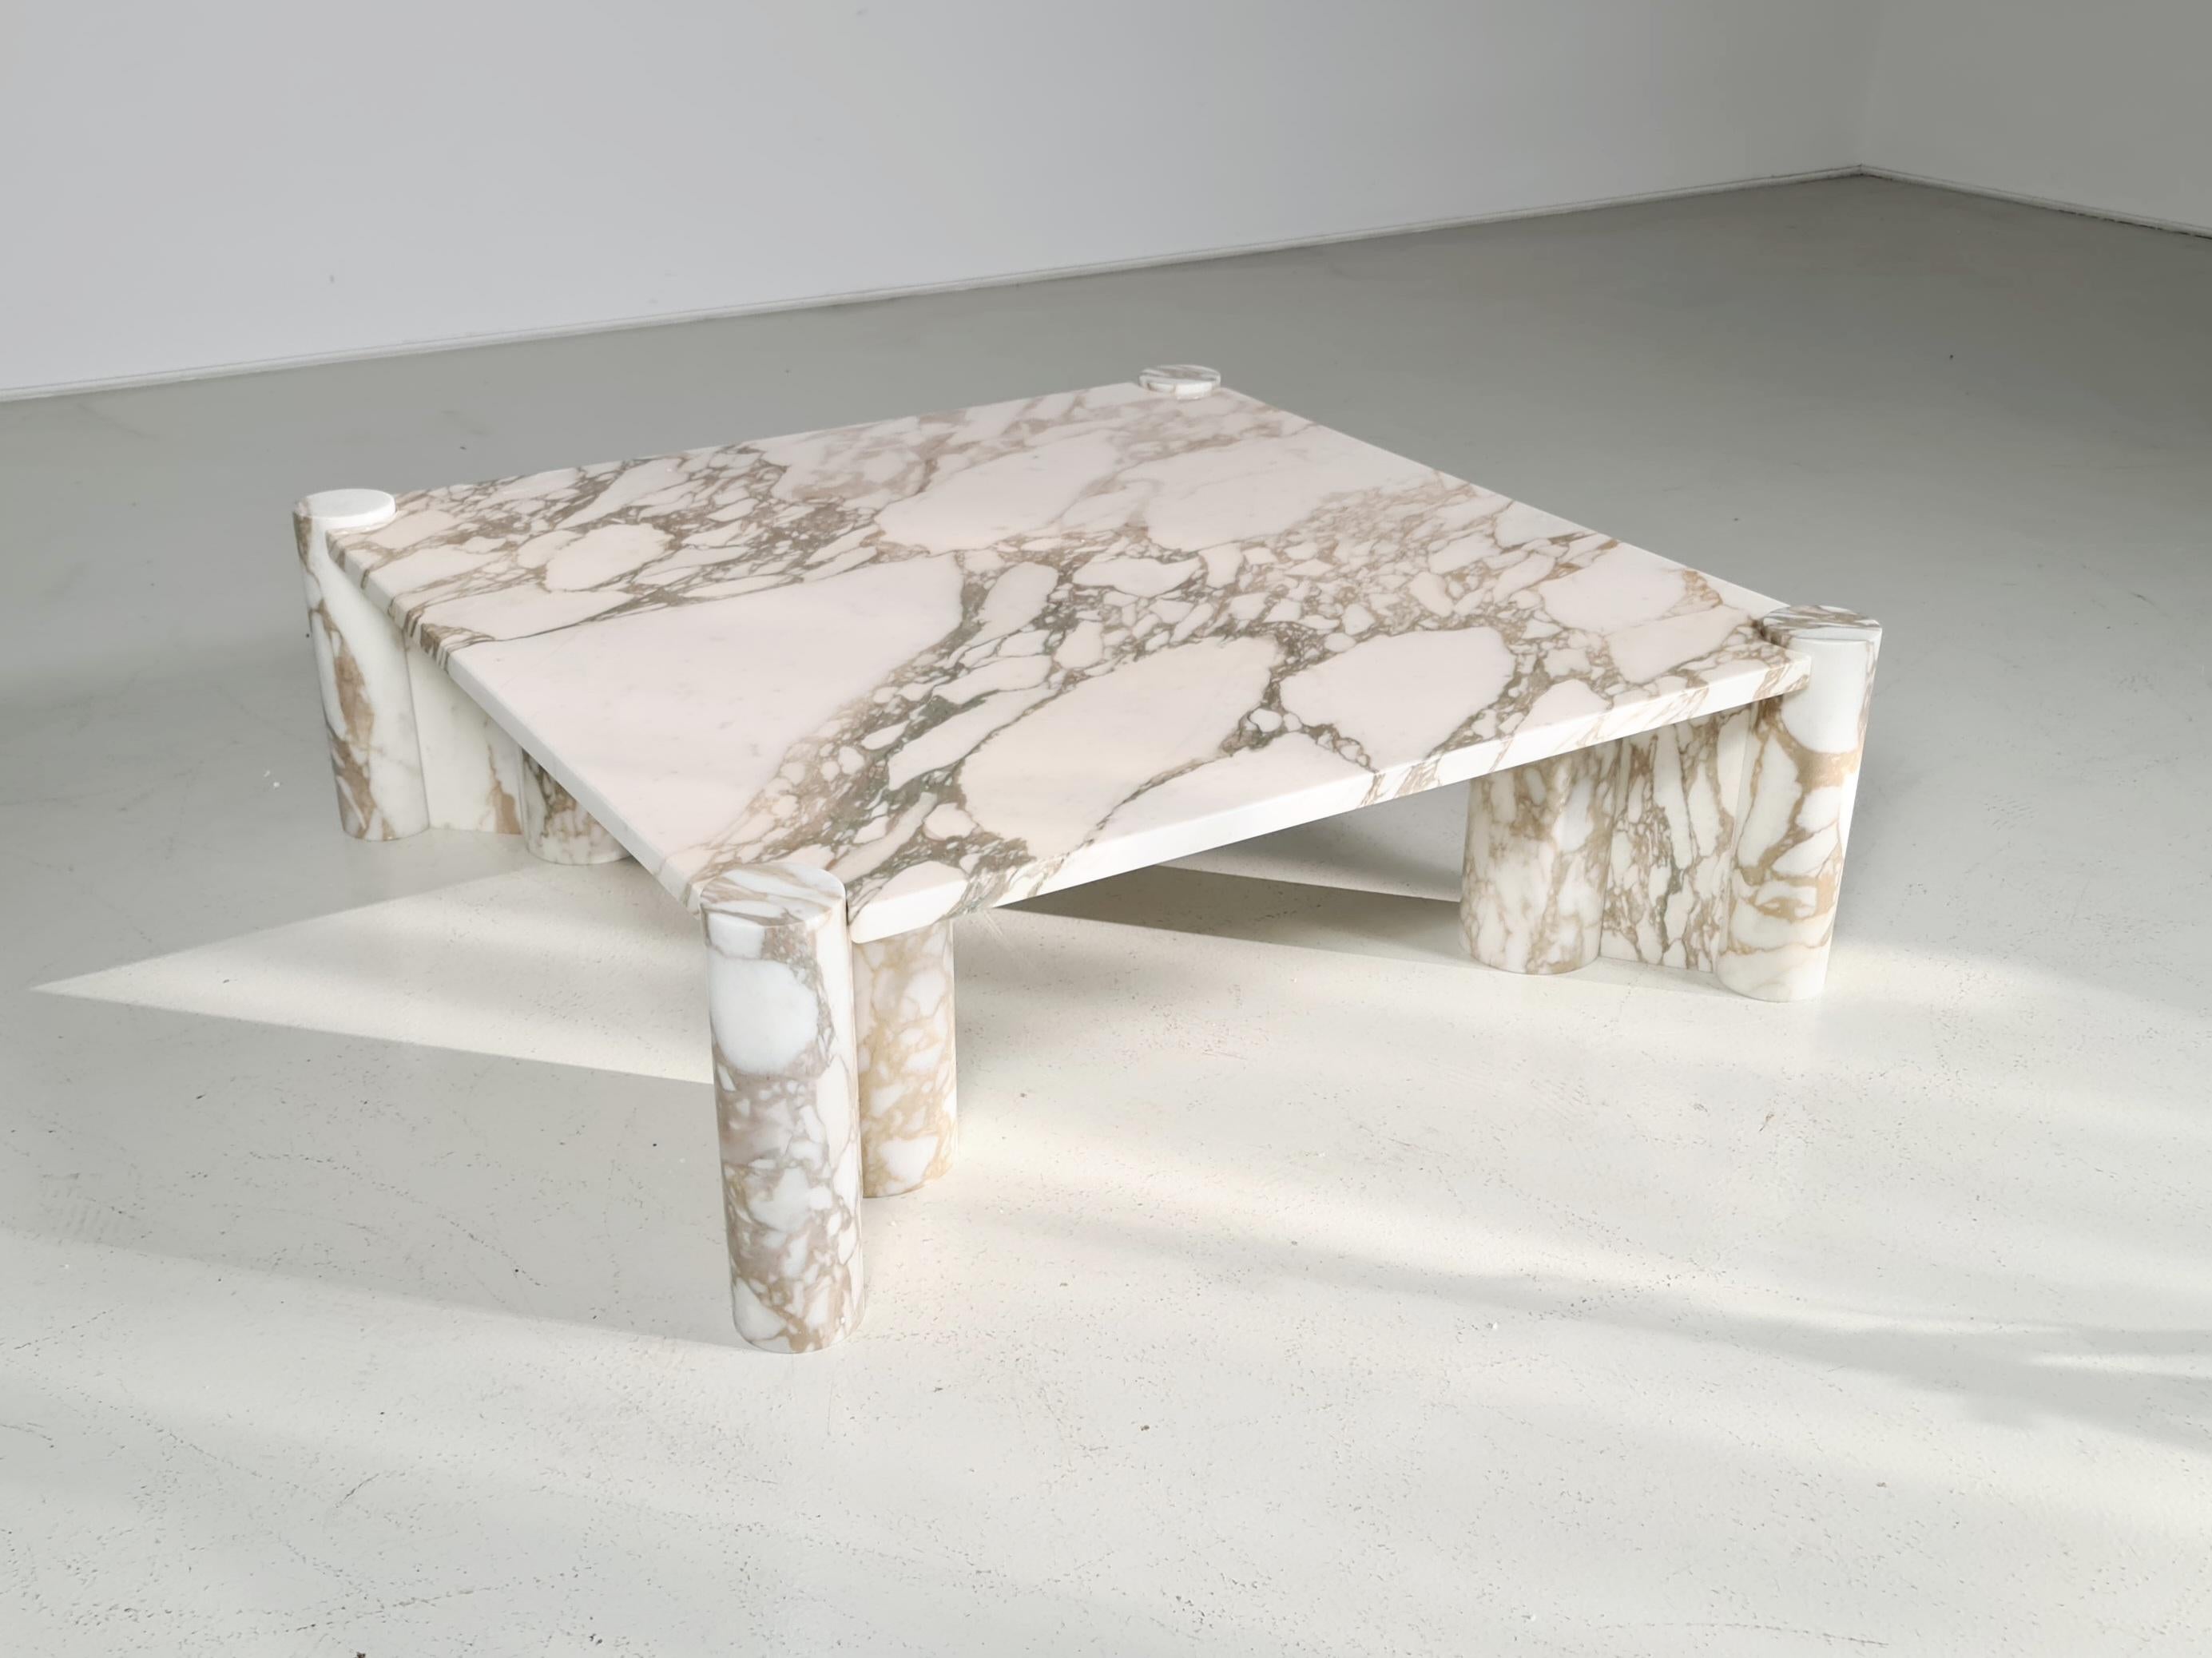 Jumbo coffee table in Arabescato oro marble, designed by Gae Aulenti for Knoll International in the 1960s. Square tabletop with four cylindrical cluster legs. The marble is in beautiful condition and has de most amazing color.